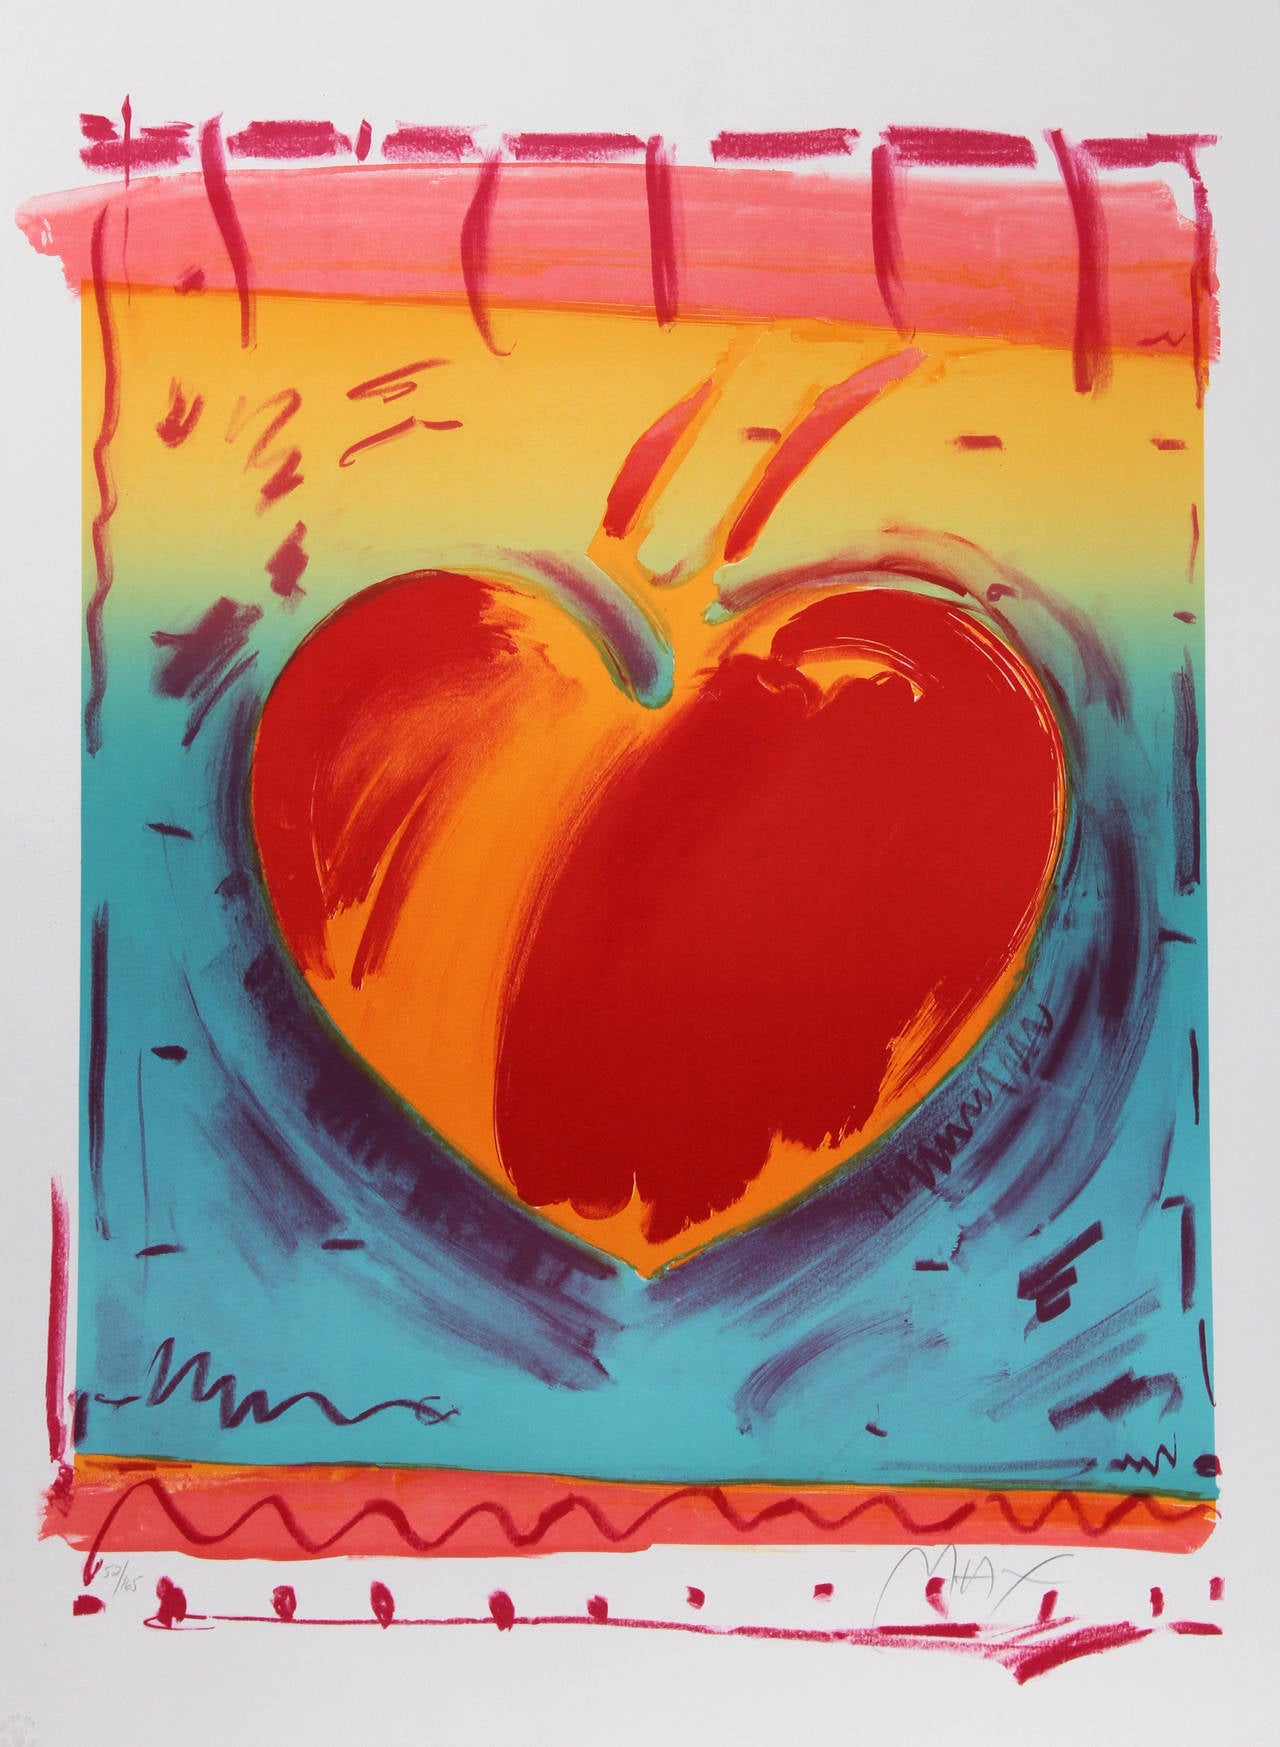 Artist: Peter Max
Title:  Heart II
Year: 1981
Medium: Lithograph, signed and numbered in pencil 
Edition: 165, HC
Image Size: 26 x 20 inches 
Paper Size: 30 in. x 22 in. (76.2 cm x 55.88 cm)